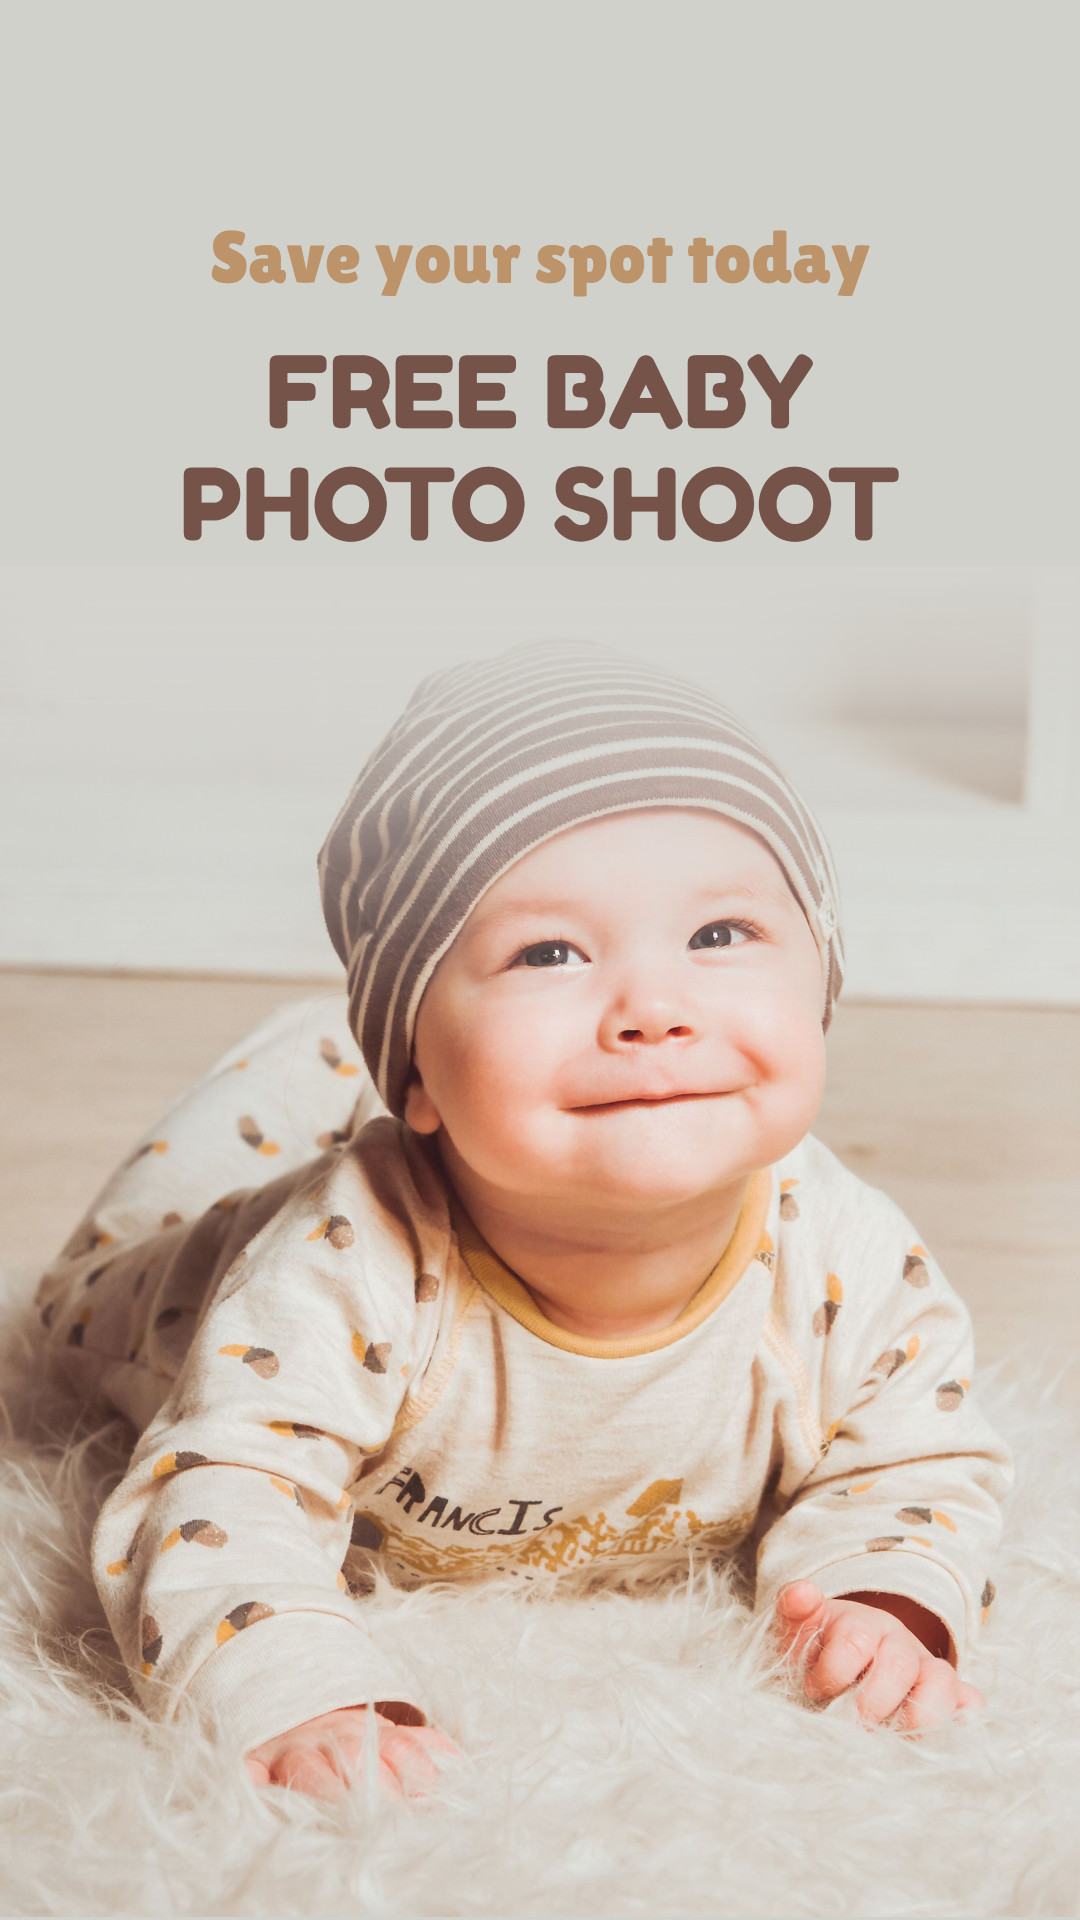 Save Your Spot - Free Baby Photo Shoot